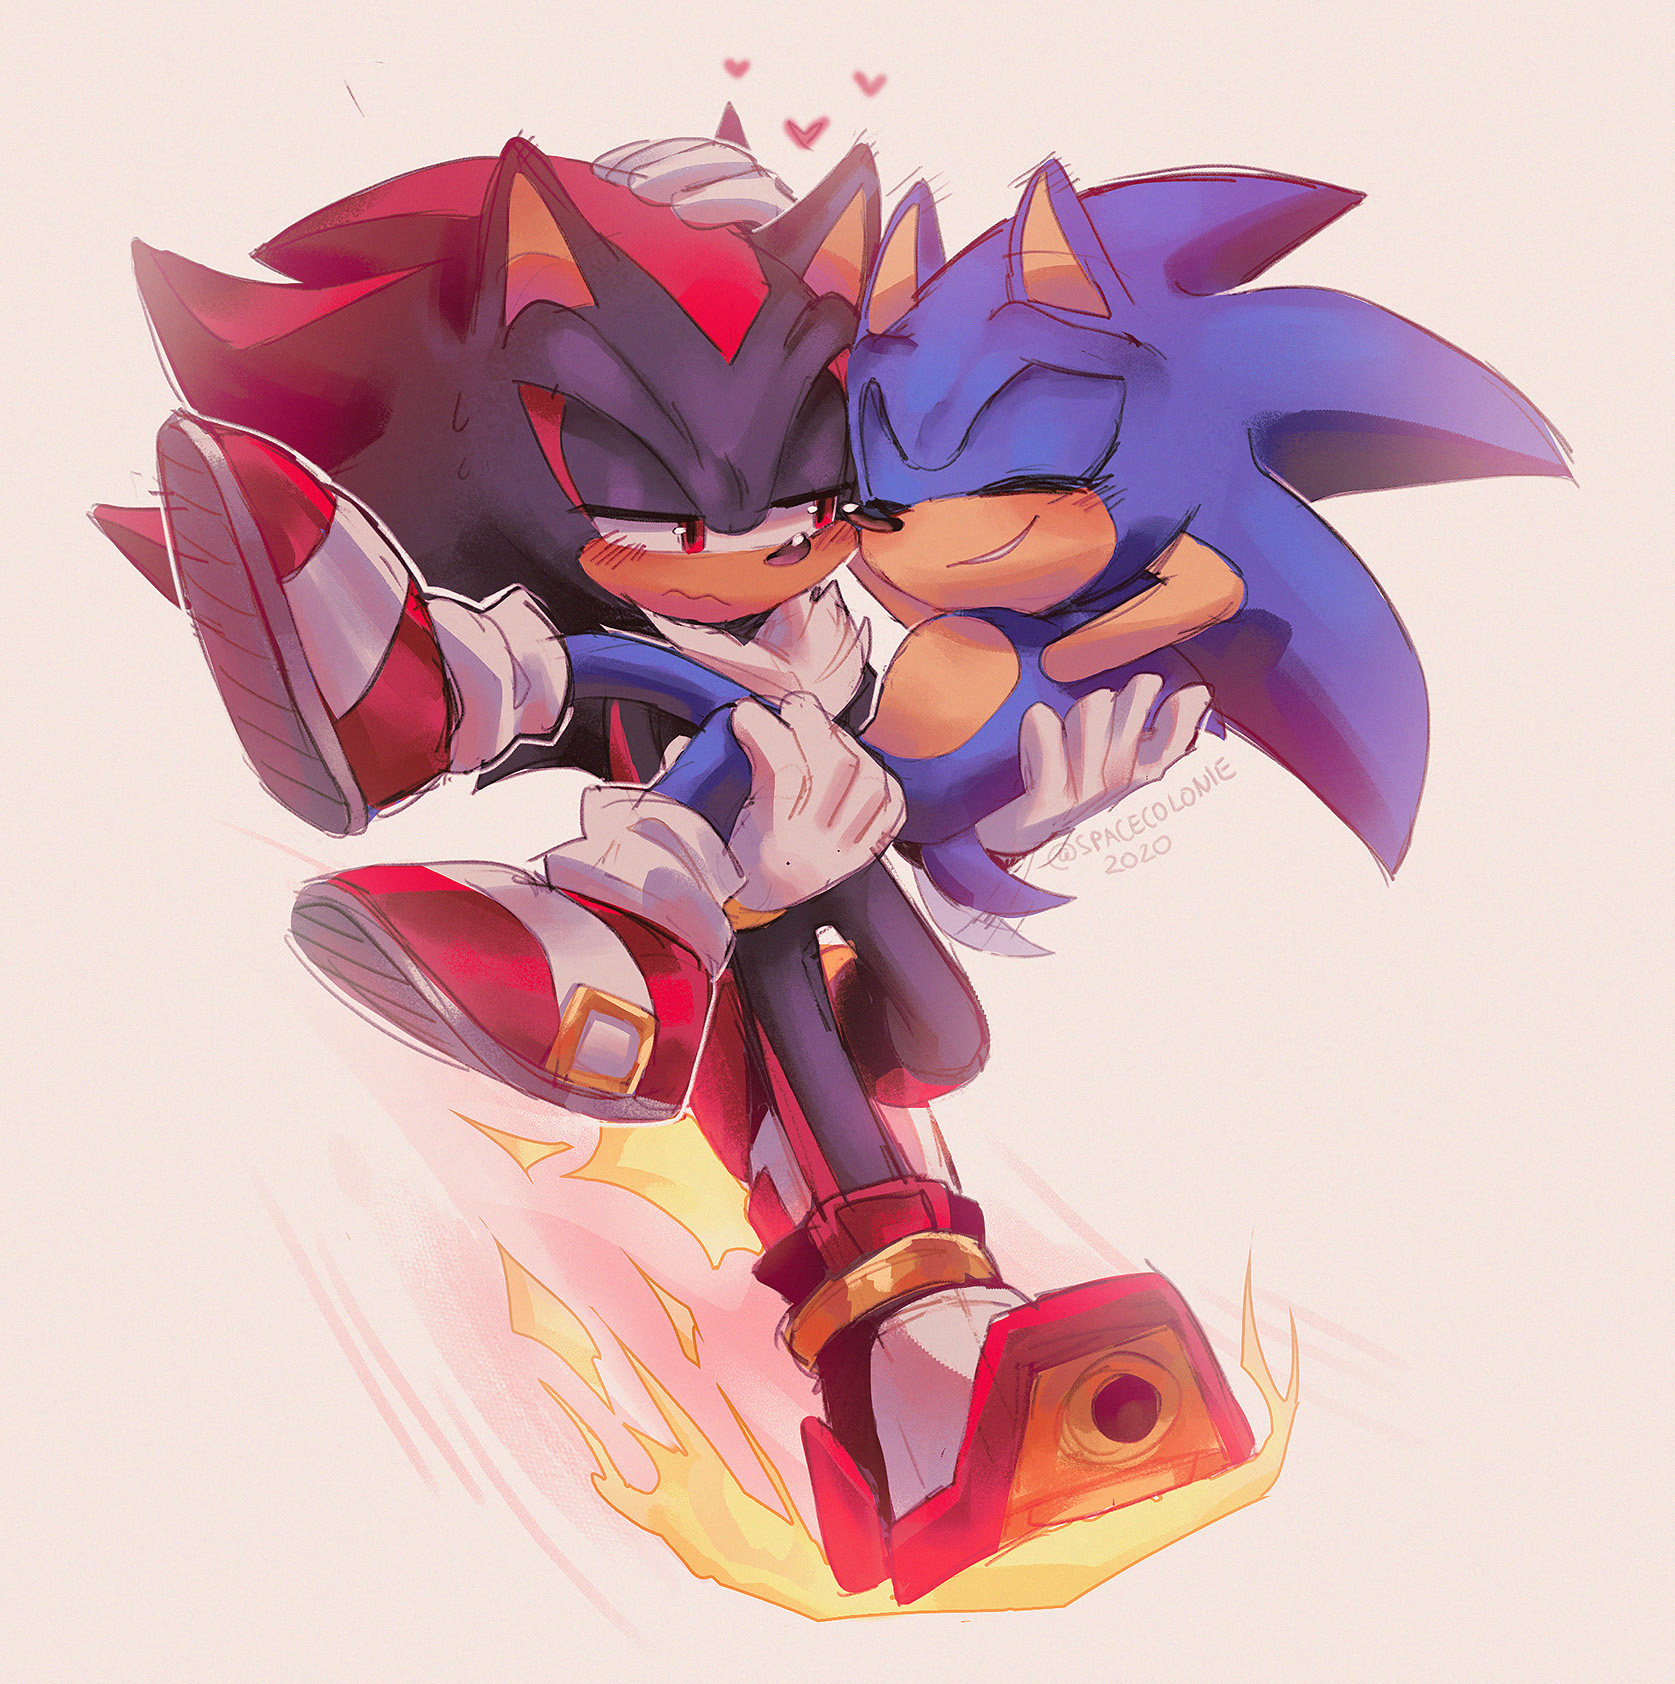 A selection of Sonic and Shadow fanart from IDW Sonic Issue 35 / X